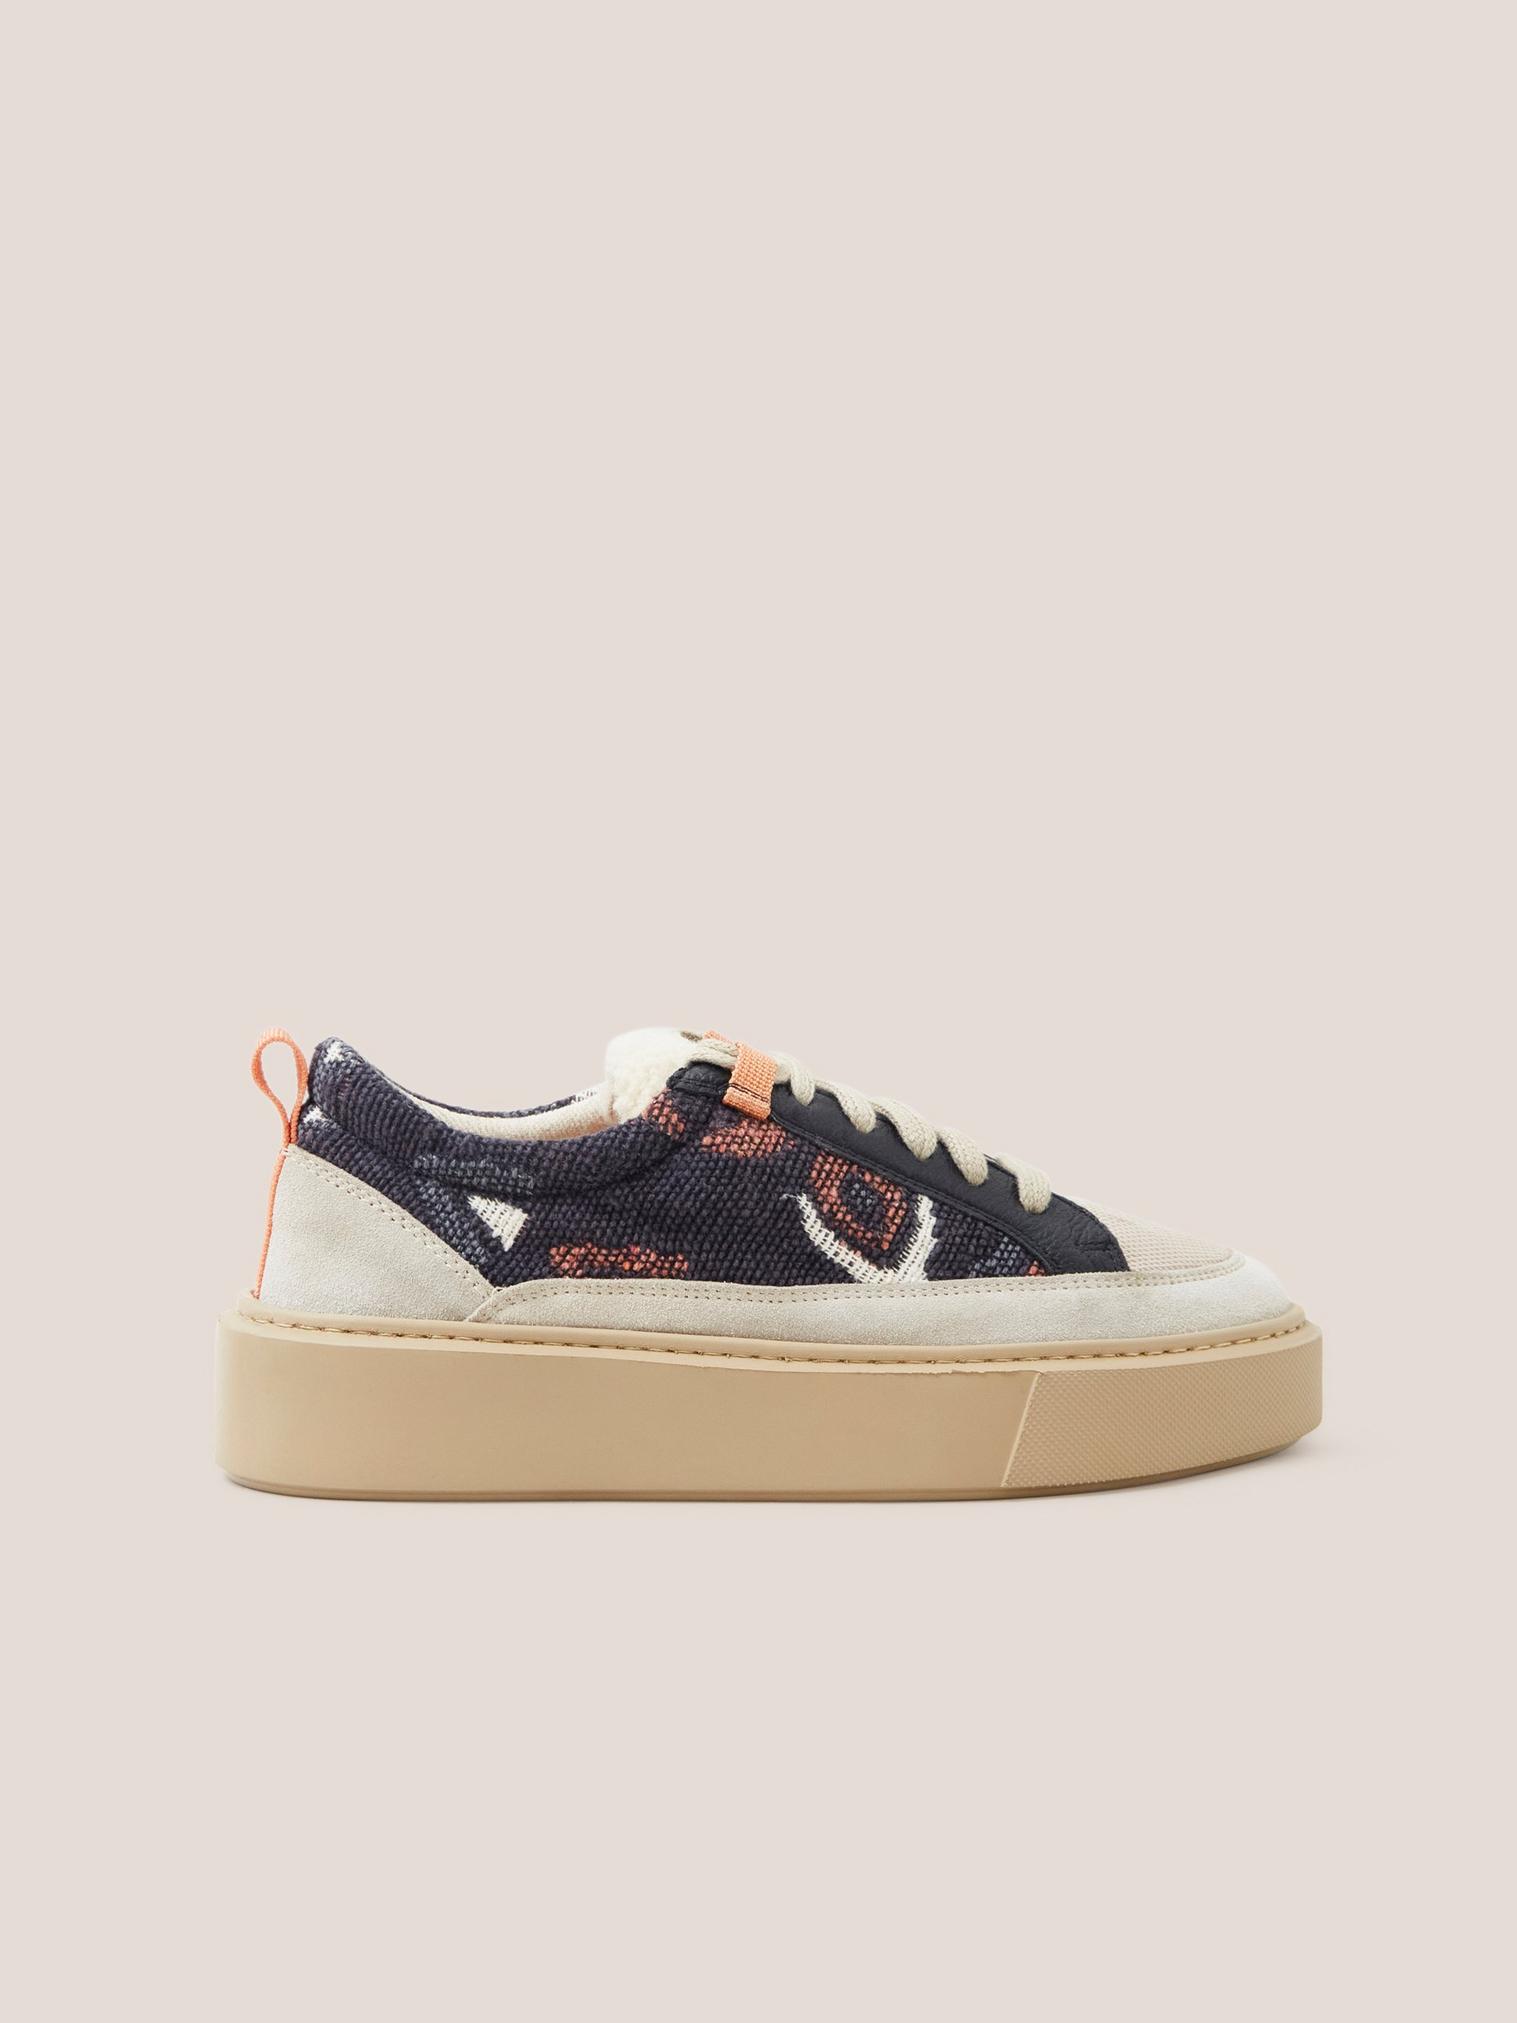 XL Extralight Suede Trainer in NAVY MULTI - MODEL FRONT